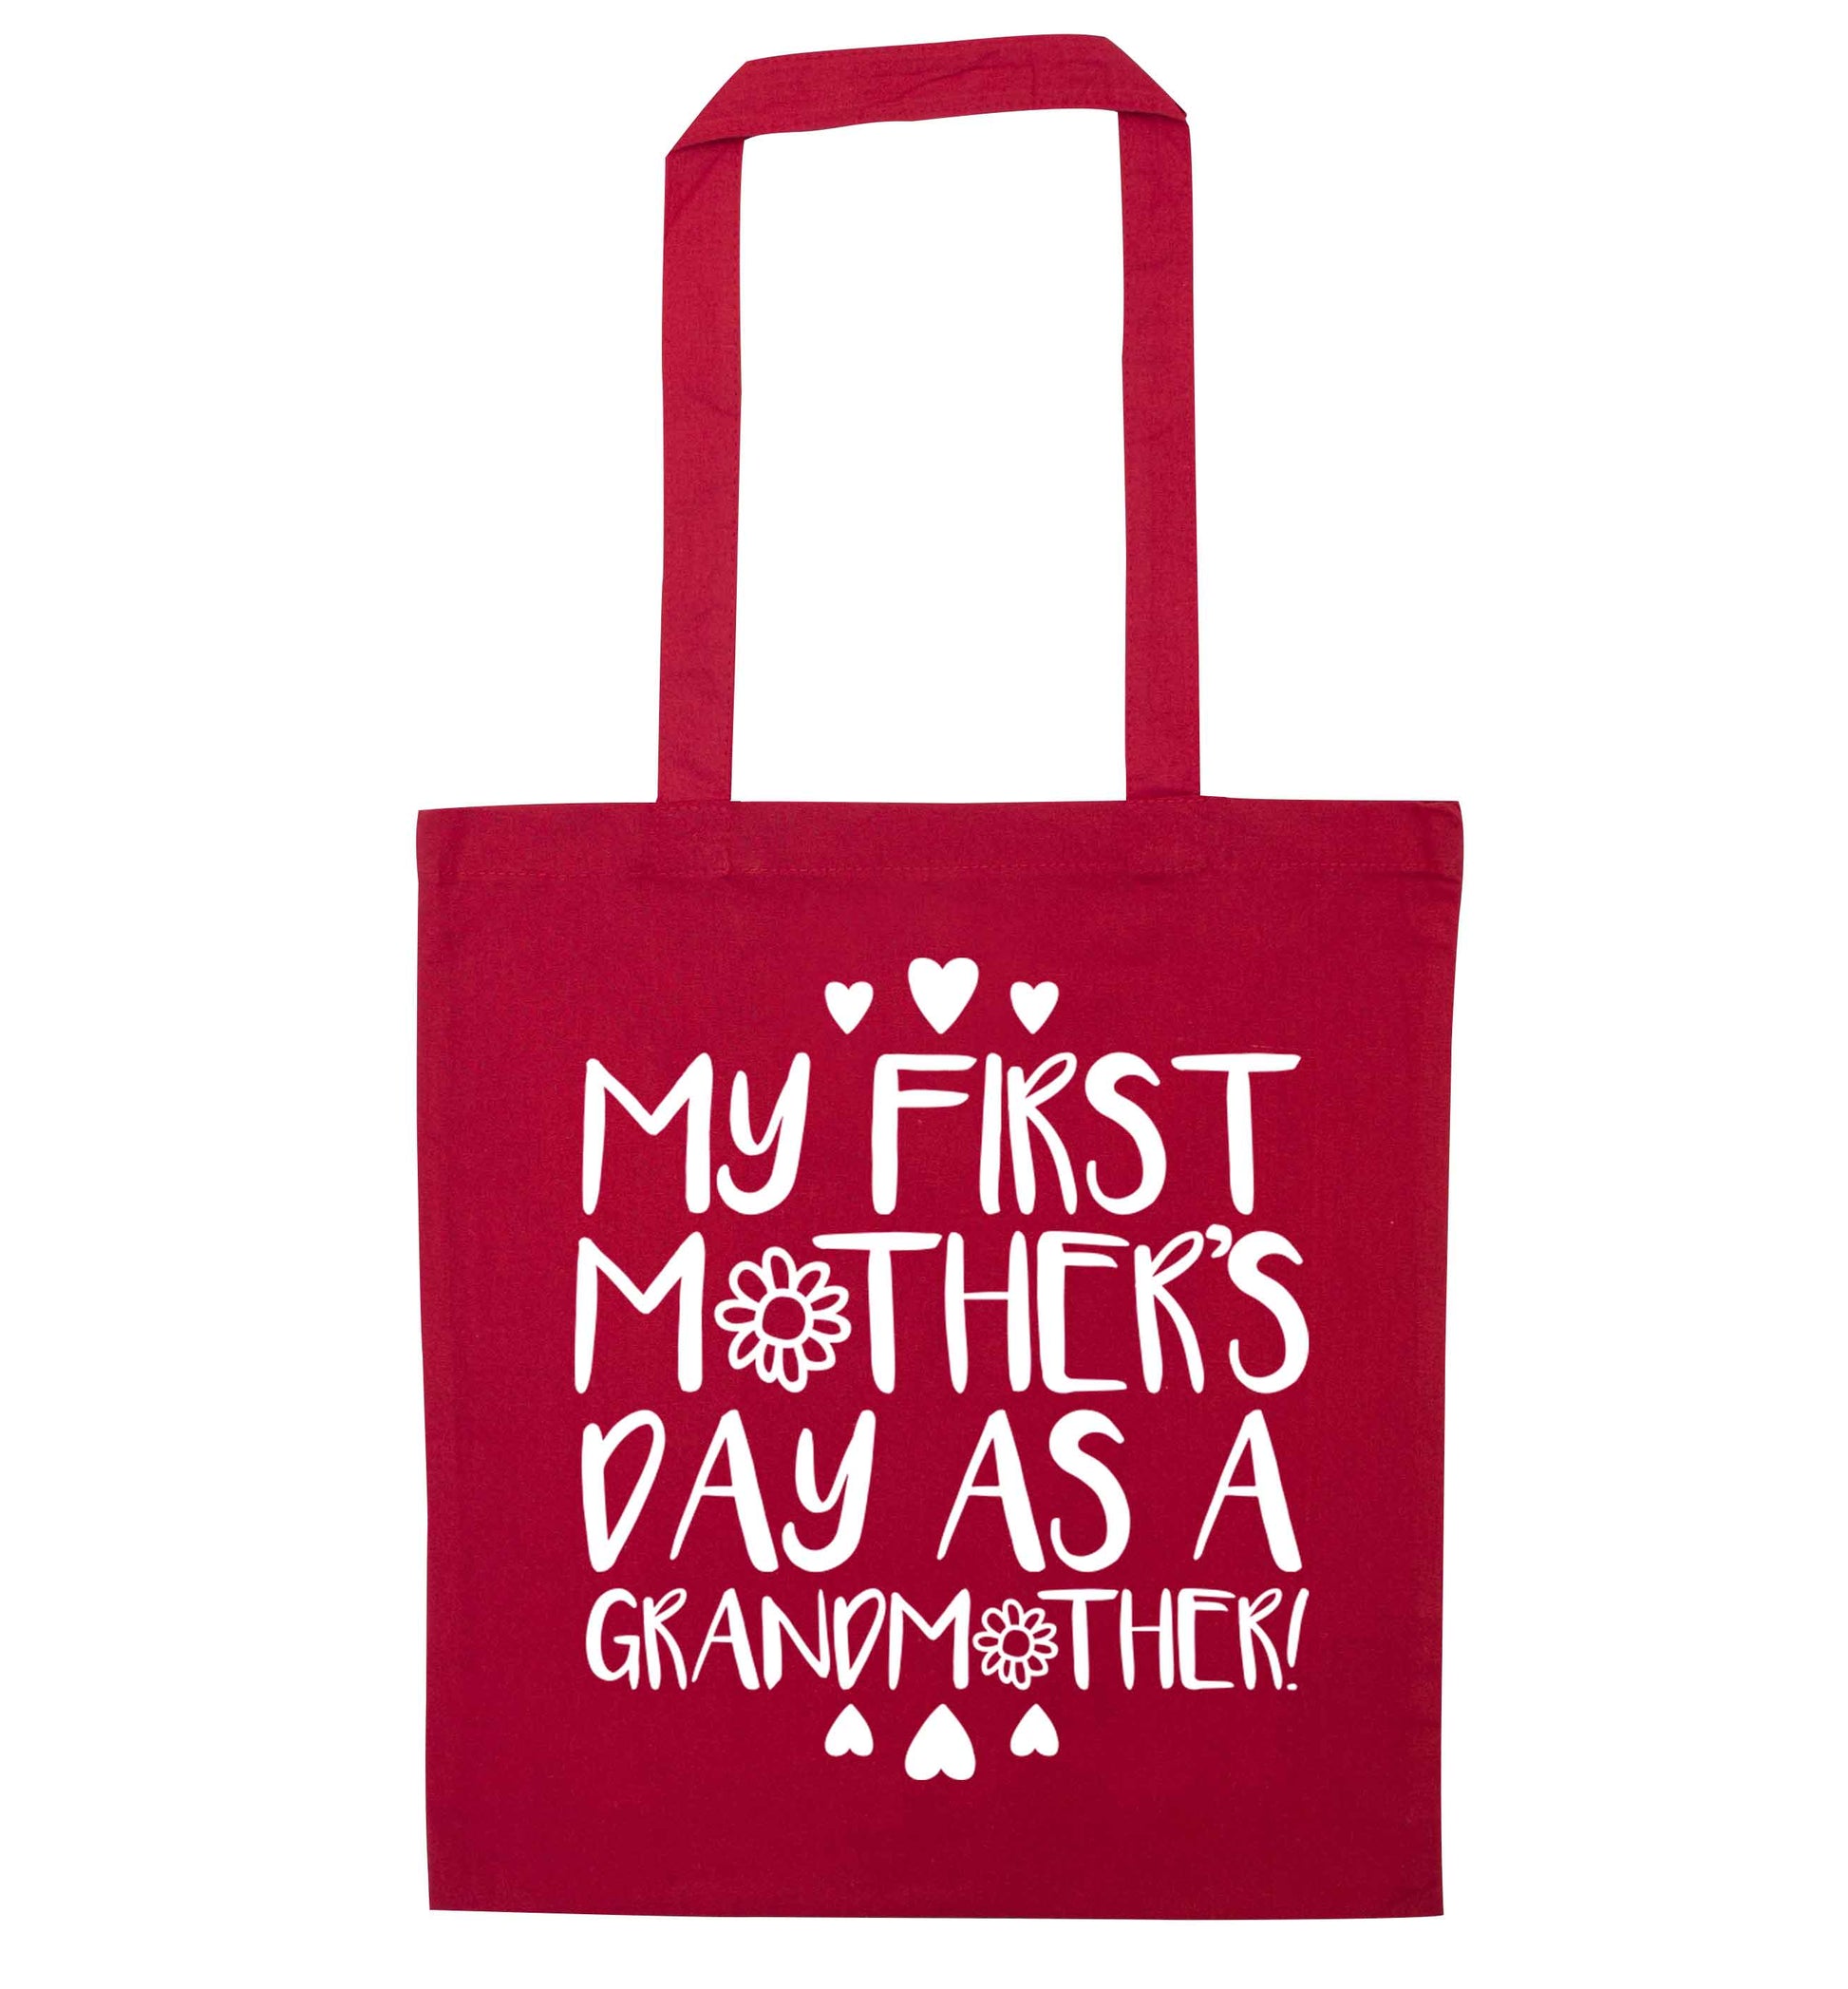 It's my first mother's day as a grandmother red tote bag